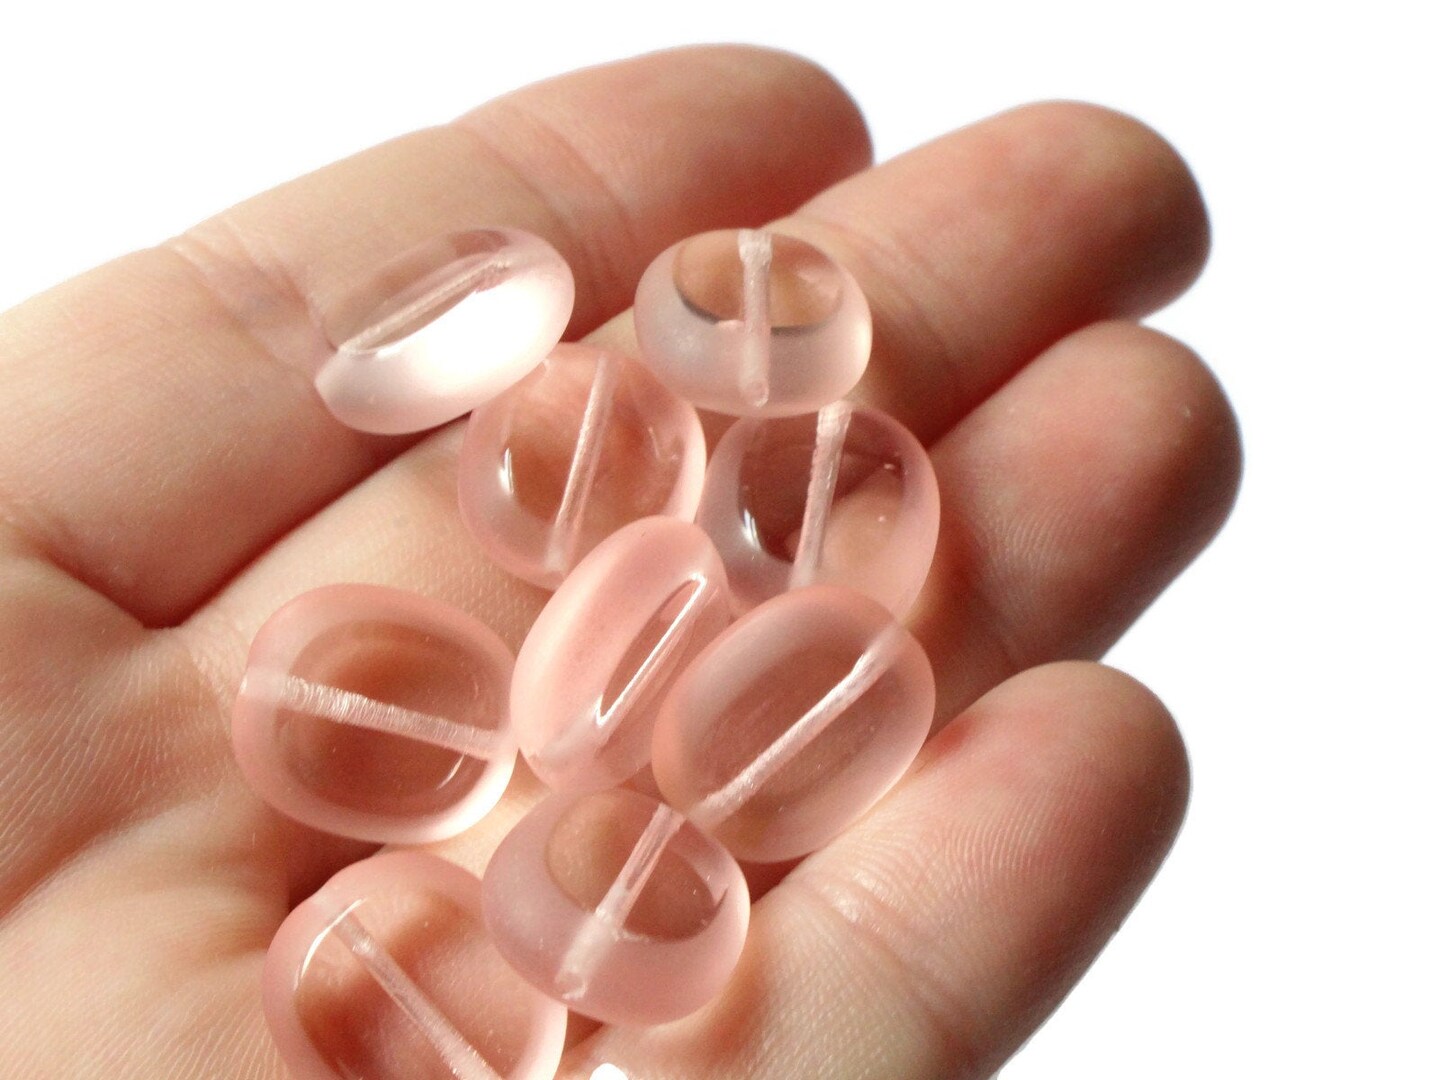 10 14mm x 12mm Pink Pressed Glass Beads Vintage Czech Flat Oval Beads